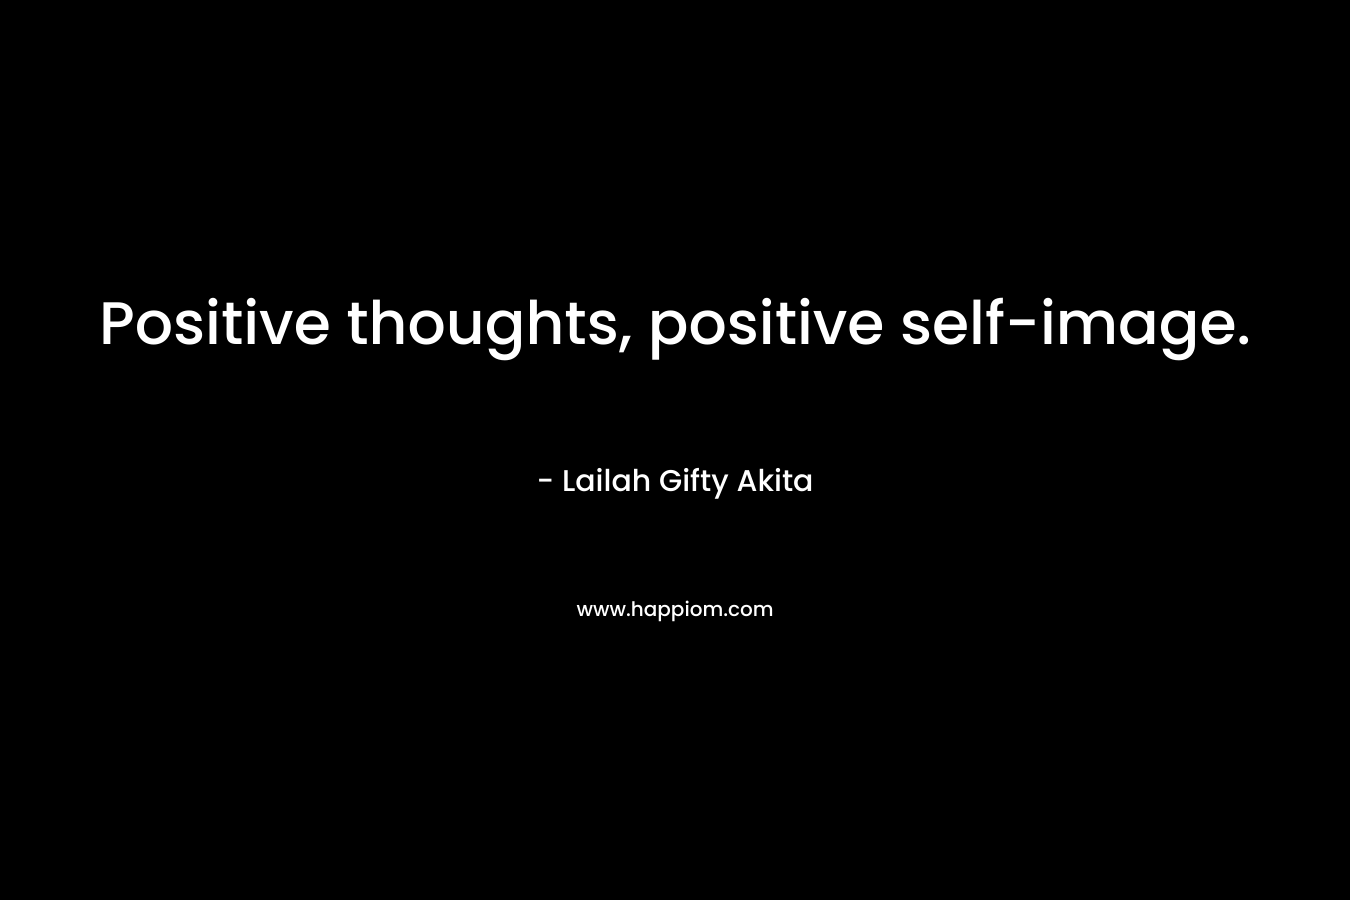 Positive thoughts, positive self-image.